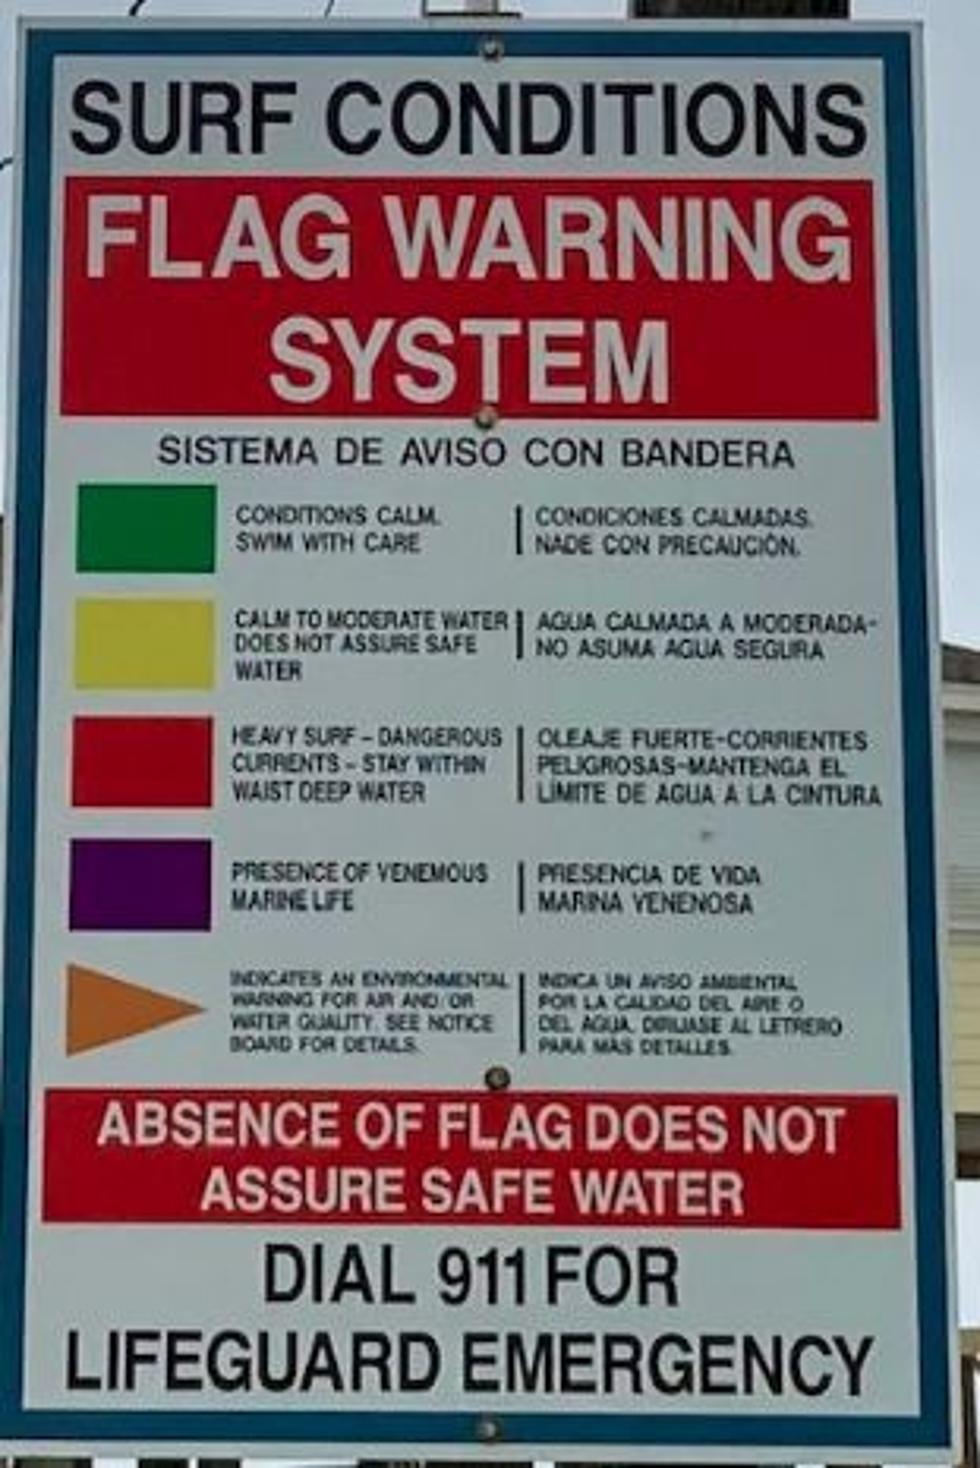 What are the Penalties for Disobeying Beach Warning Flags?